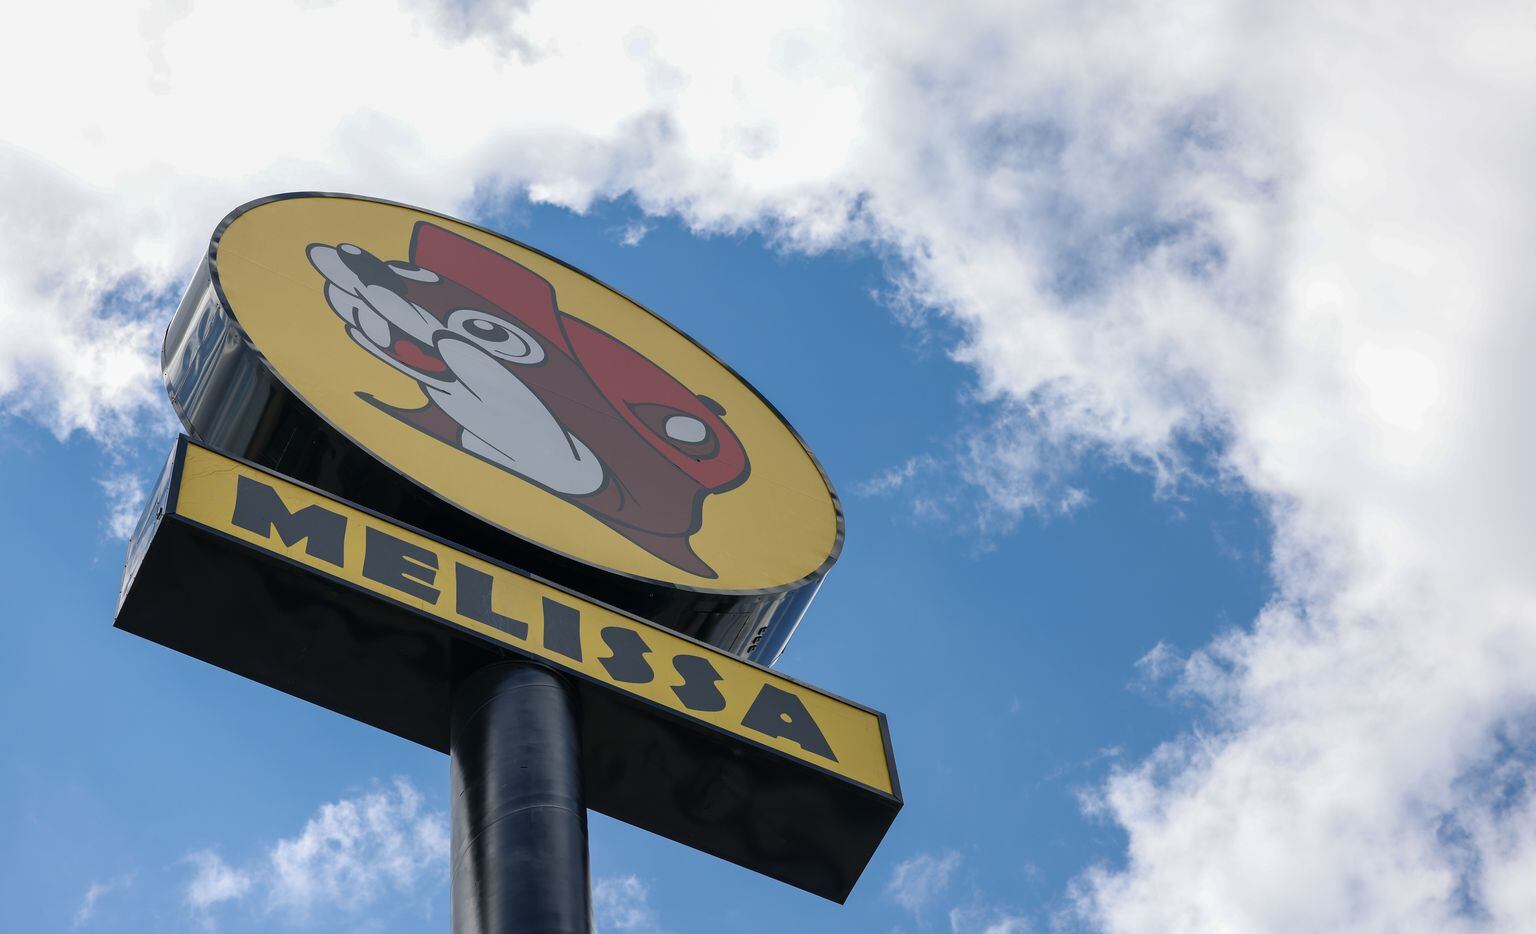 There's a Buc-ee’s along Highway 75 in Melissa.